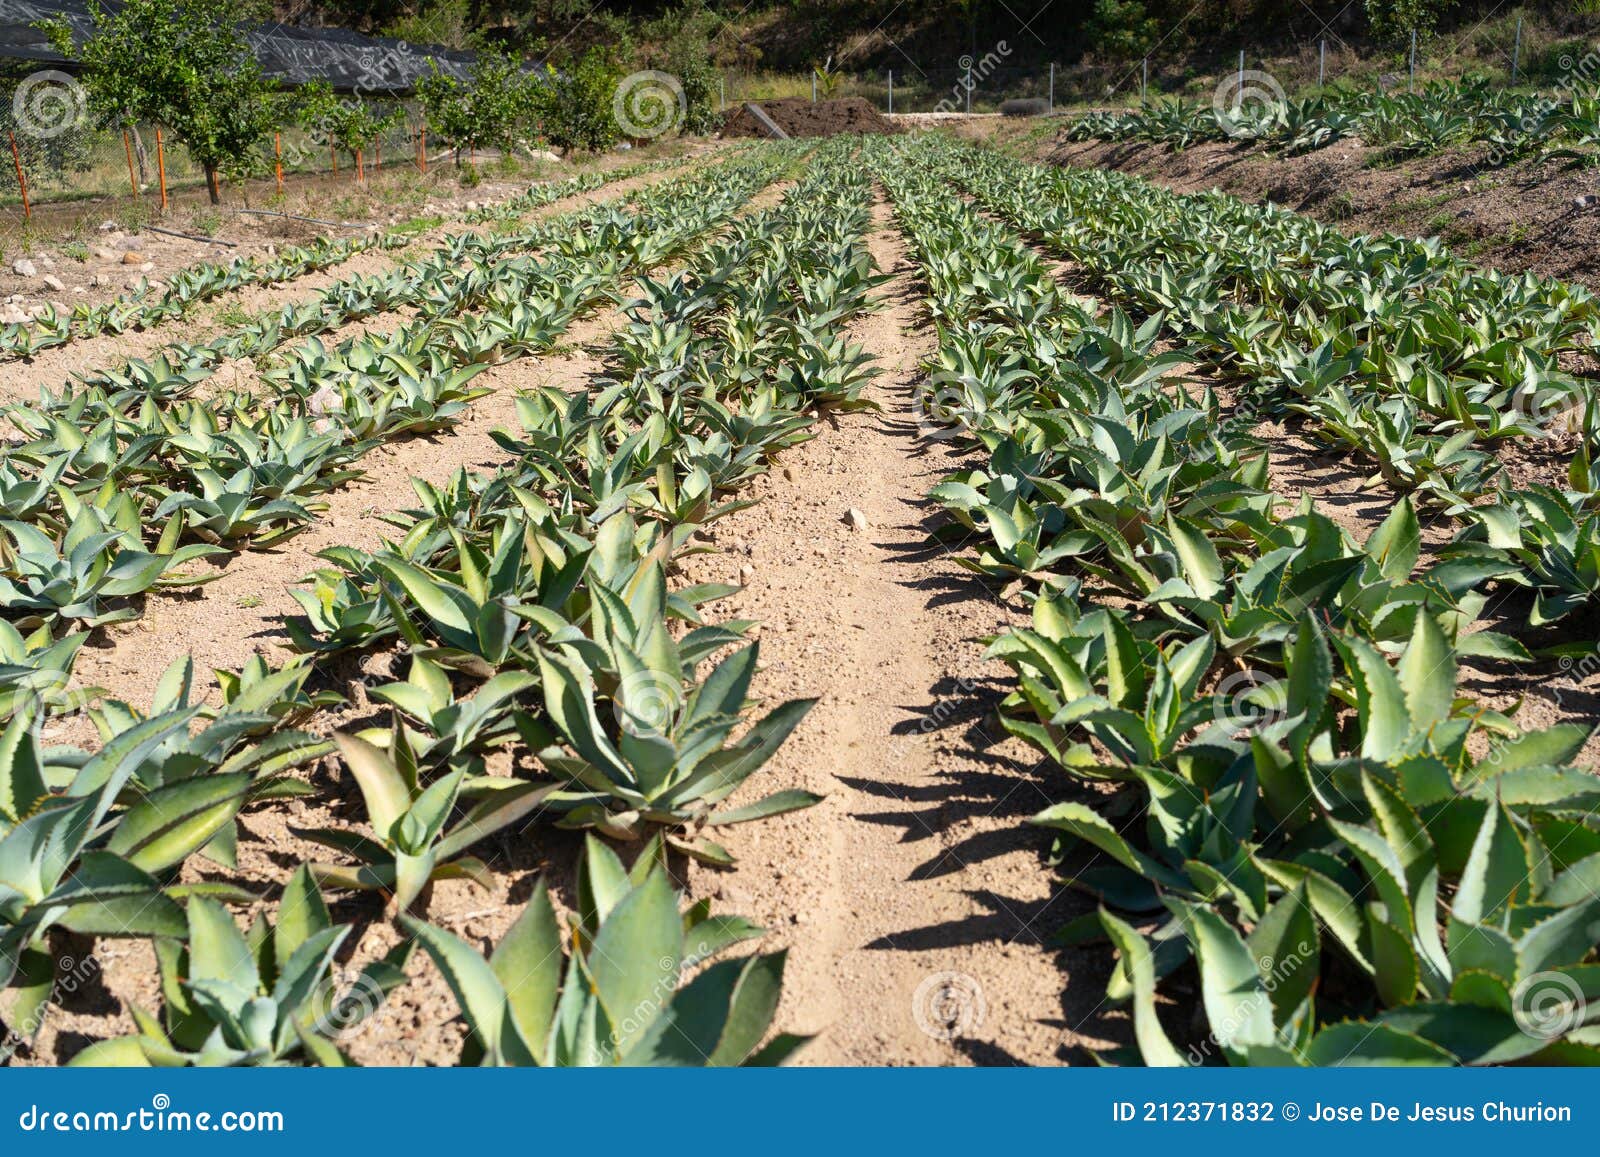 lettuce and agave plant to make raicilla and tequila.